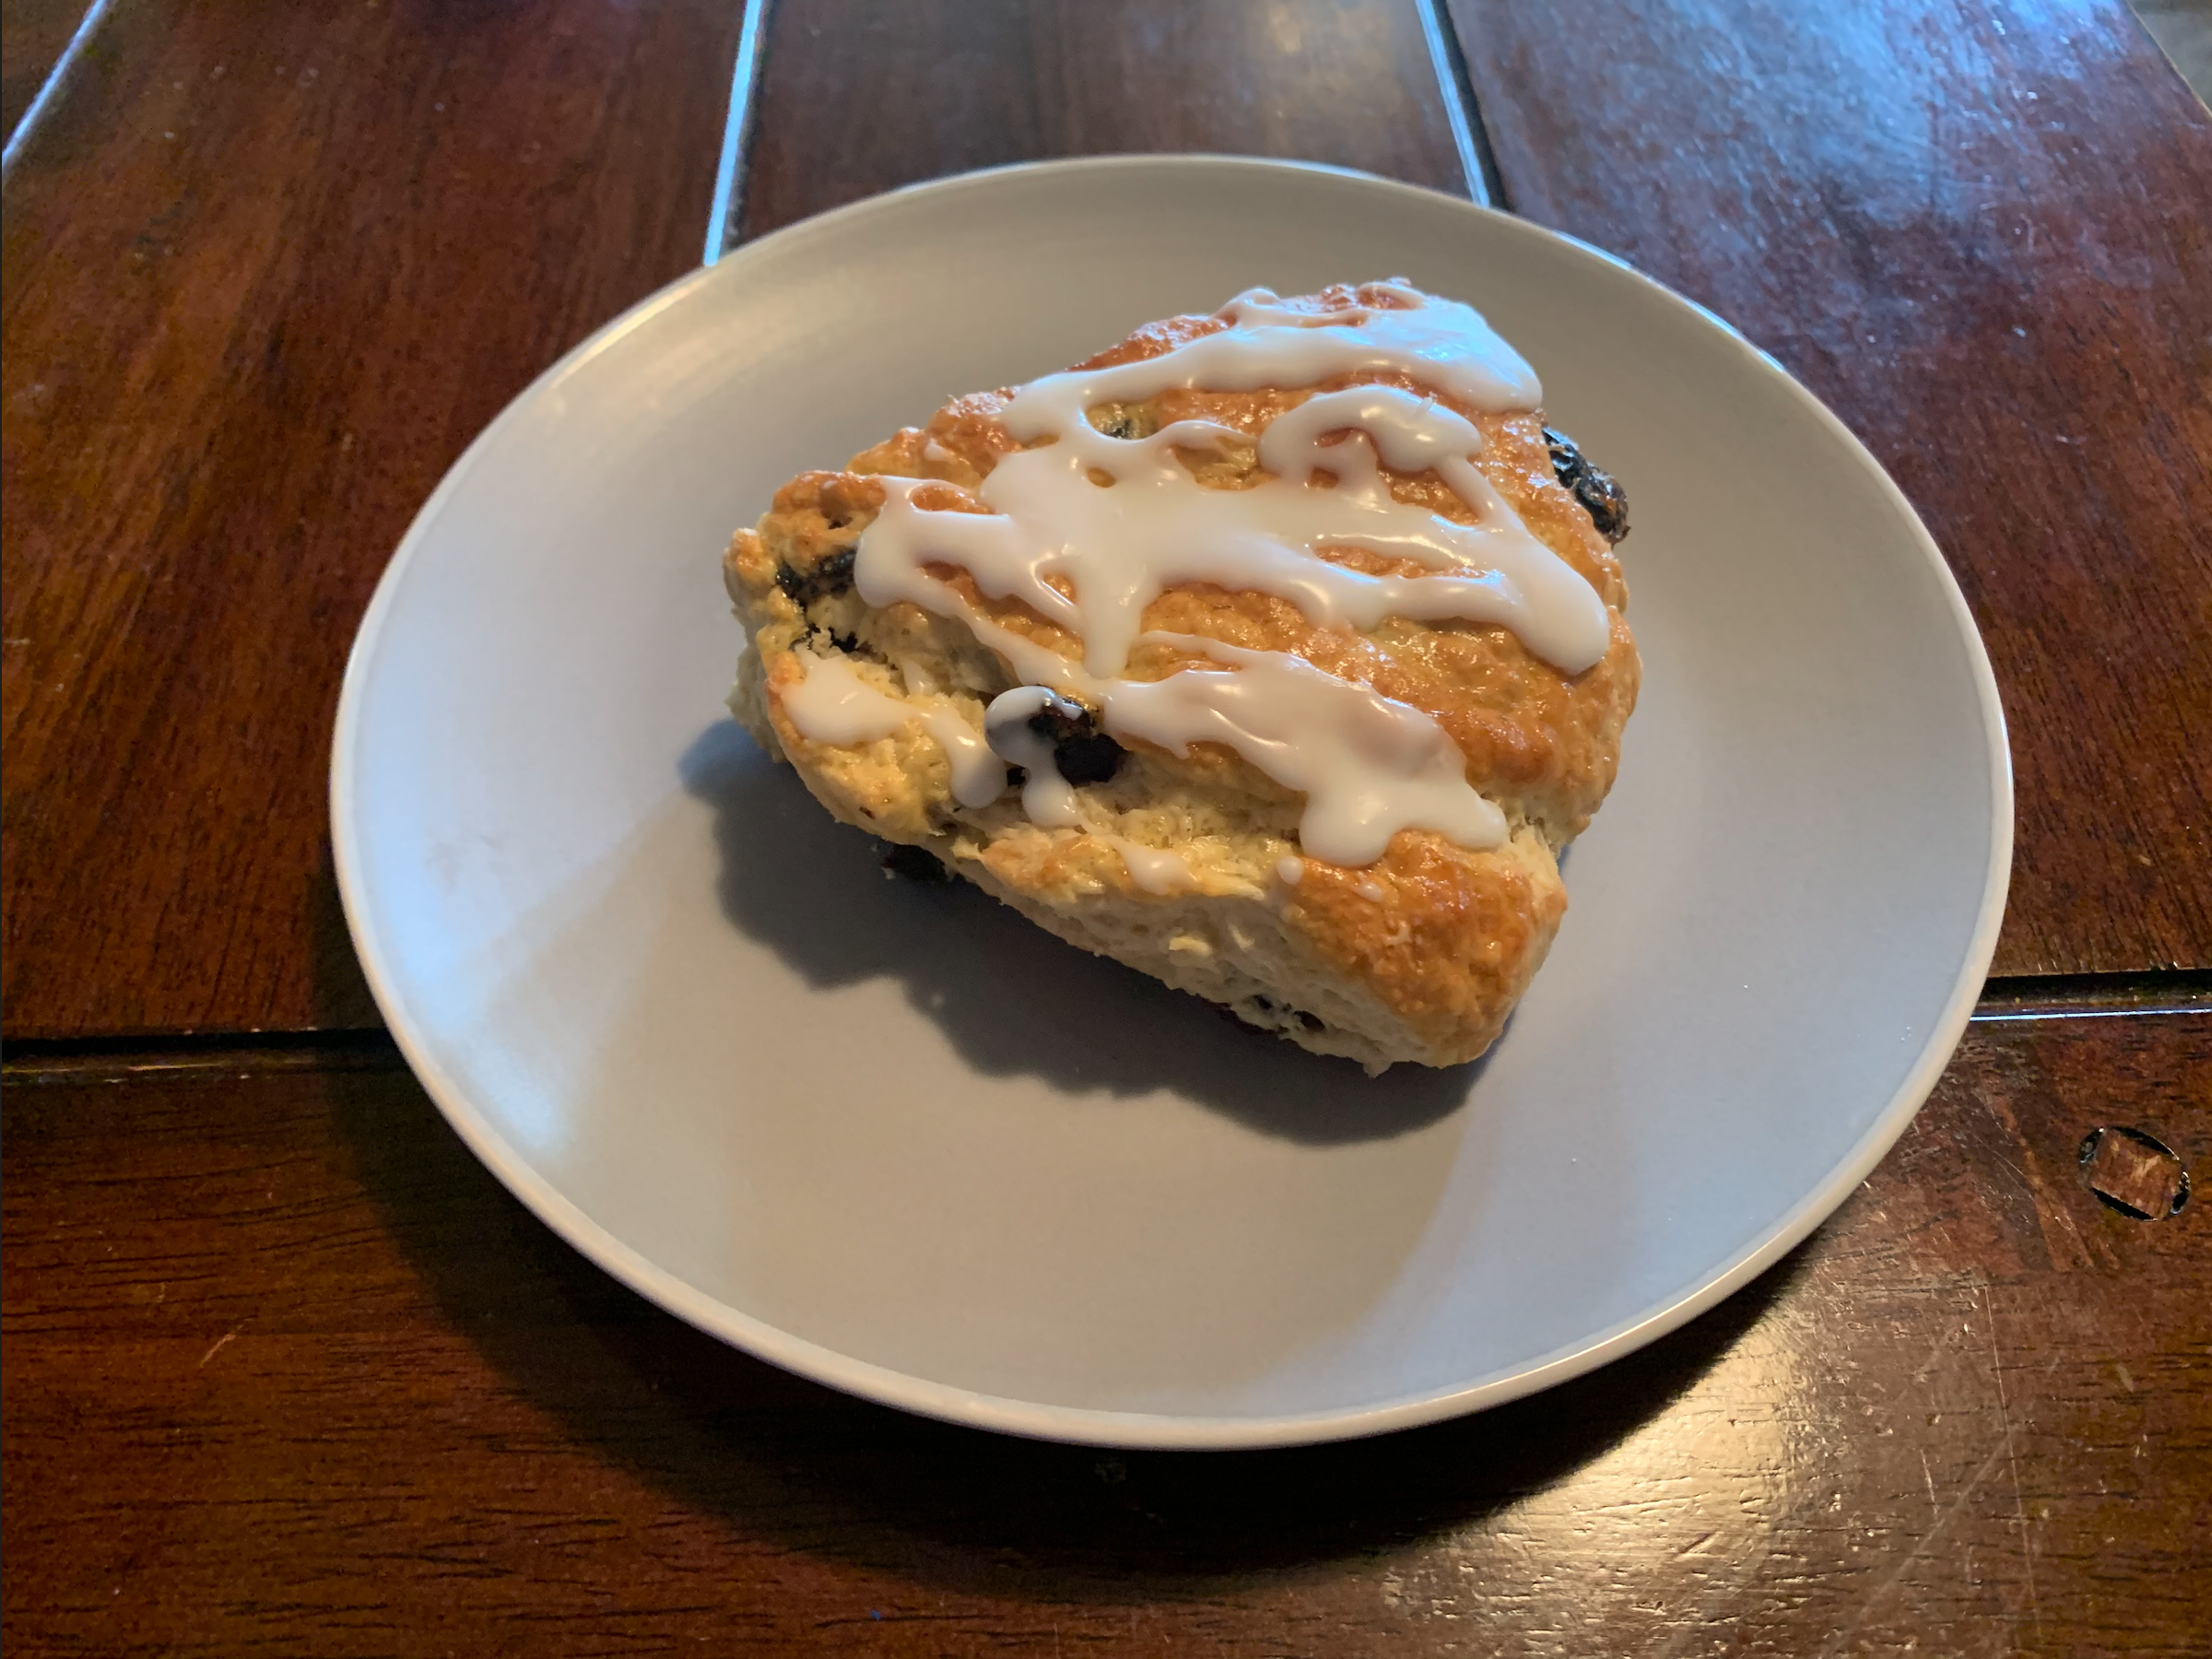 Scone with icing